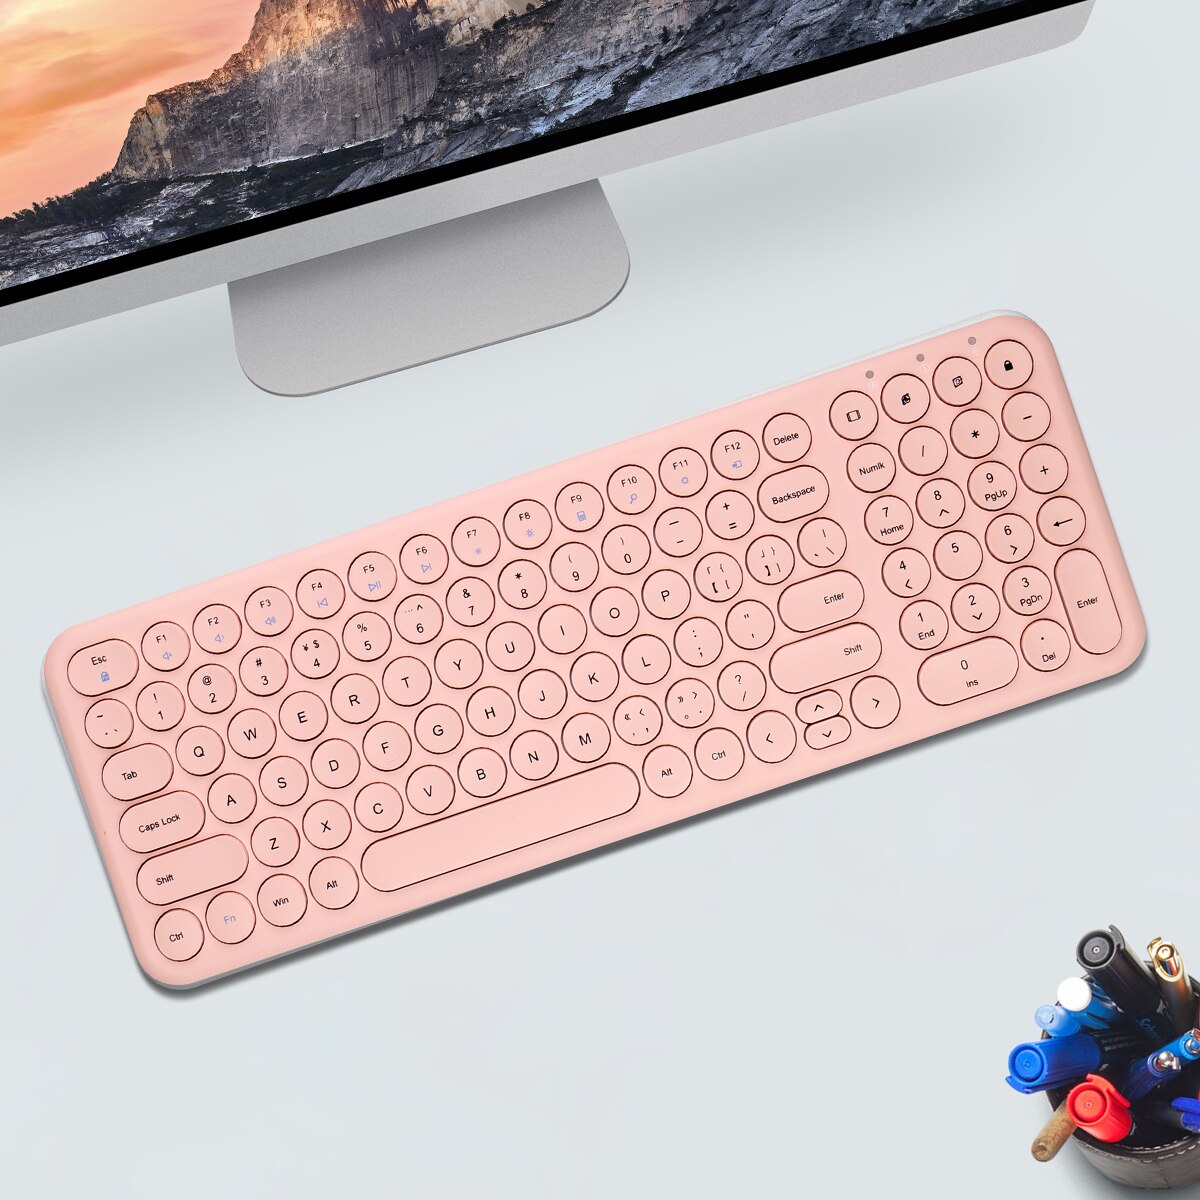 2.4G Wireless Rechargeable Gaming Keyboard And Mouse Keyboard Gaming Mouse For Macbook PC Gamer Computer Laptop Keyboard: Pink Keyboard